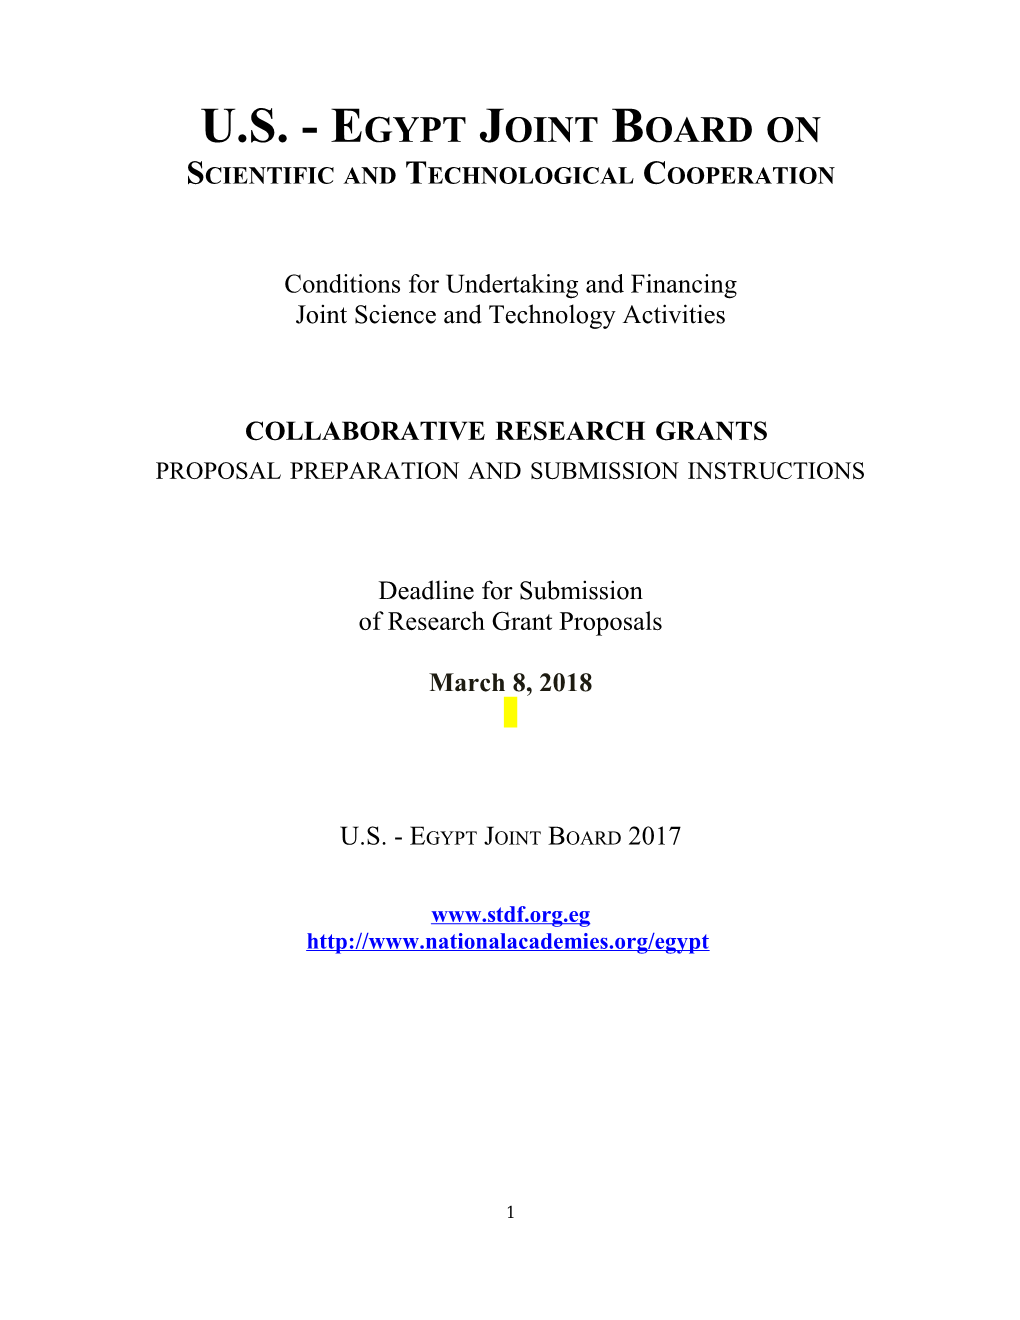 Scientific and Technological Cooperation